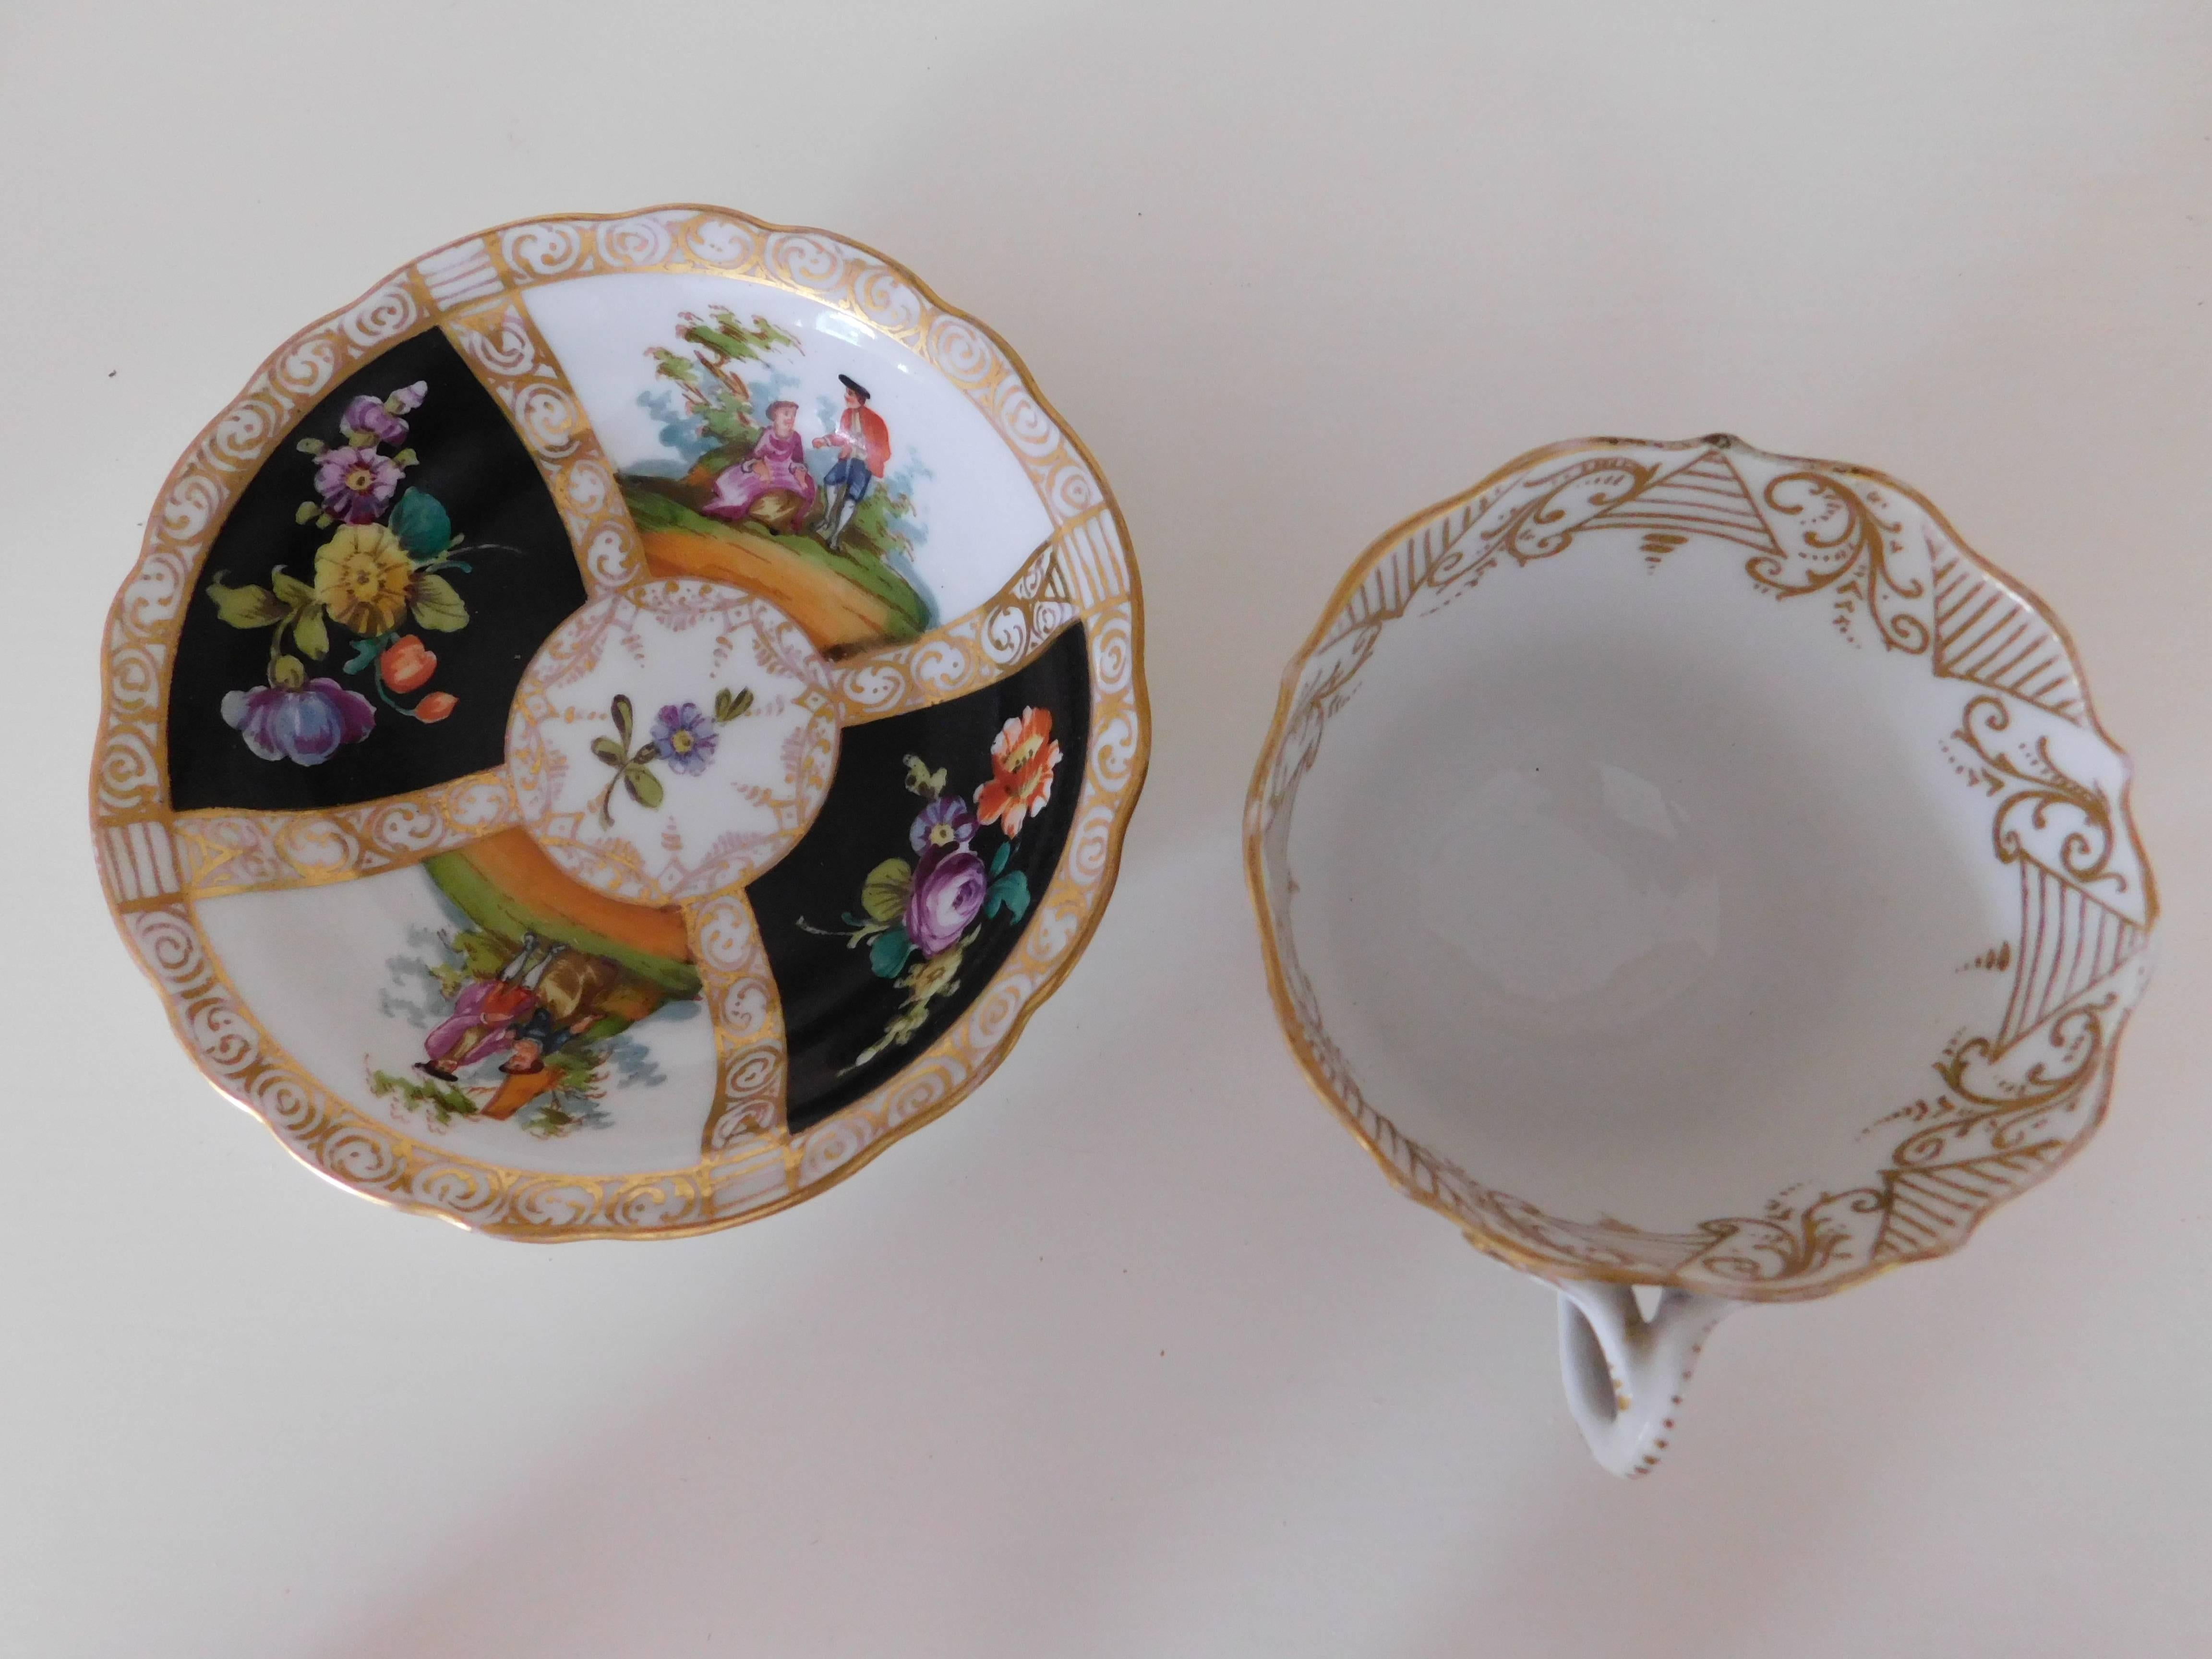 19th Century Meissen Porcelain Cup and Saucer, circa 1850 For Sale 2